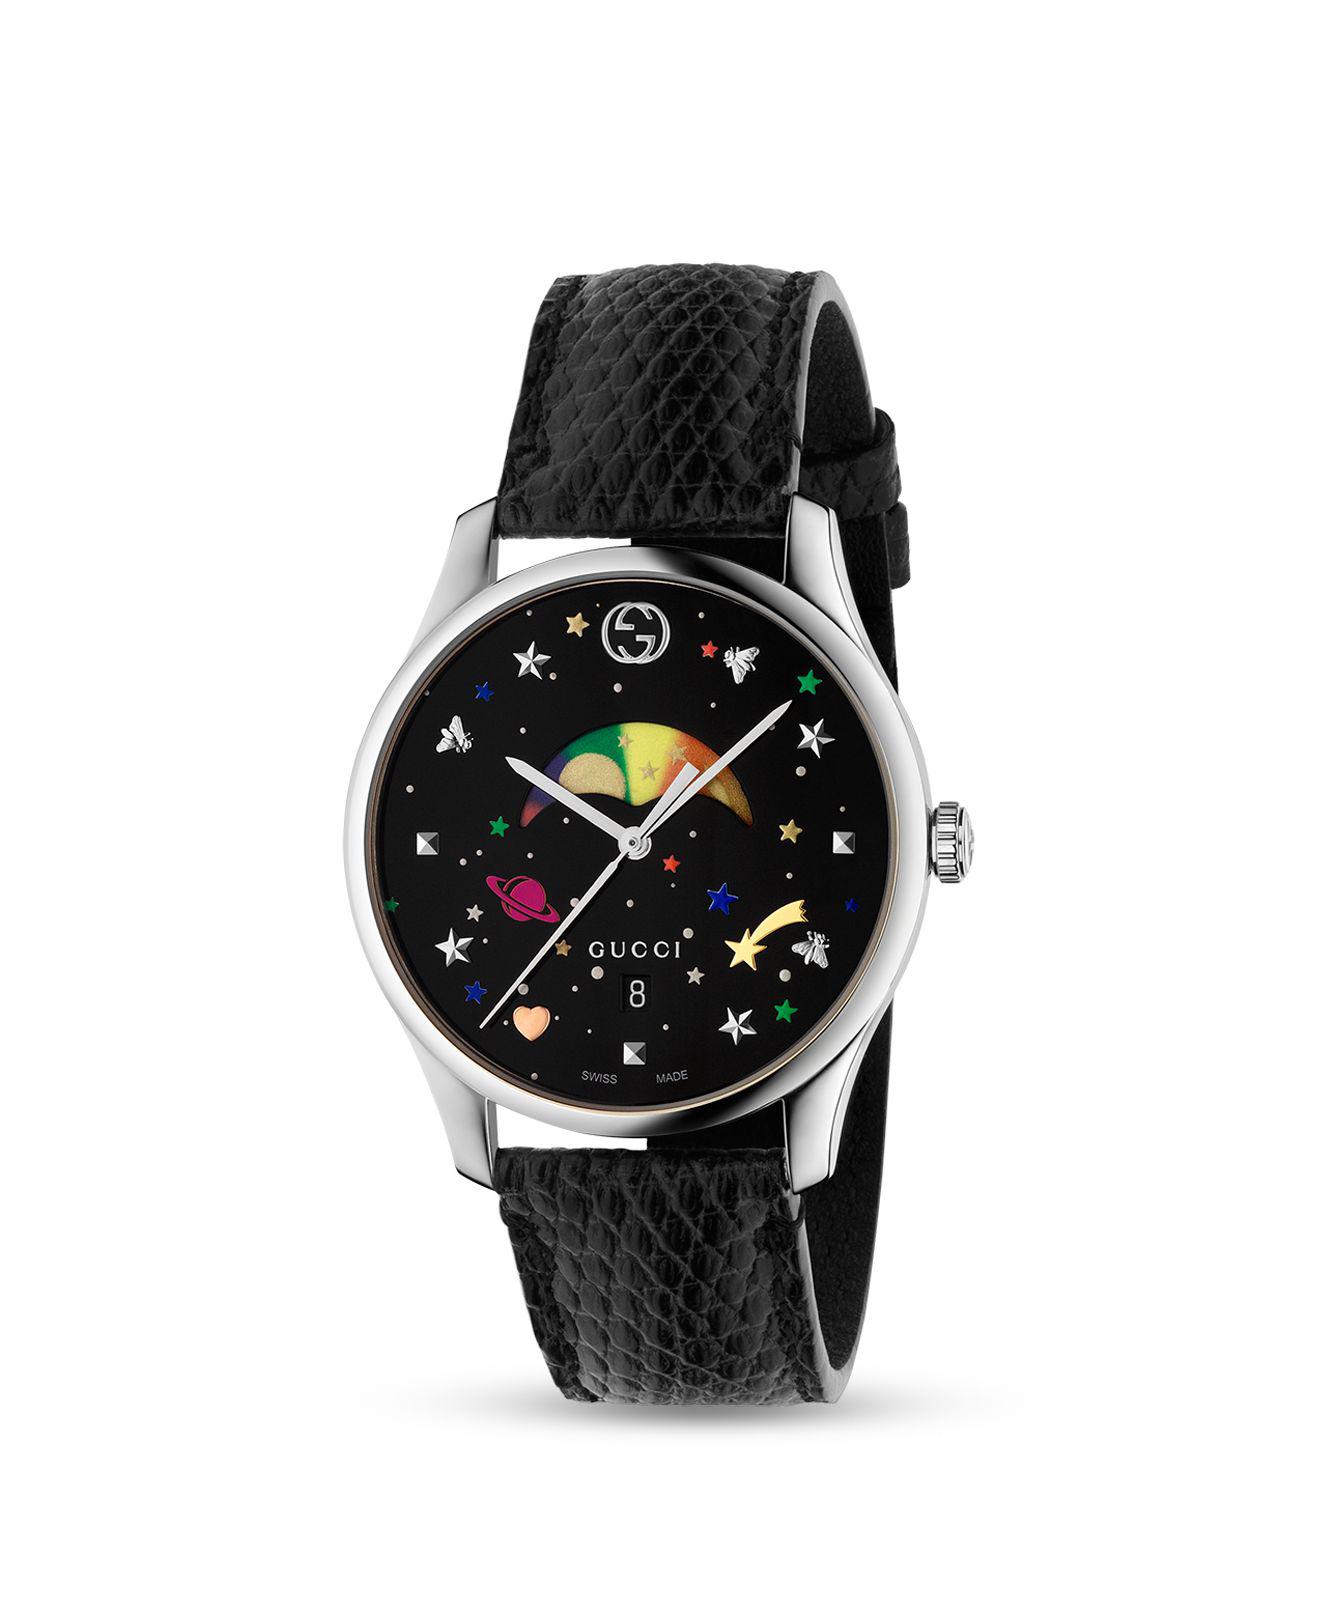 Gucci G-timeless Rainbow Moonphase Lizard Strap Watch in Black 